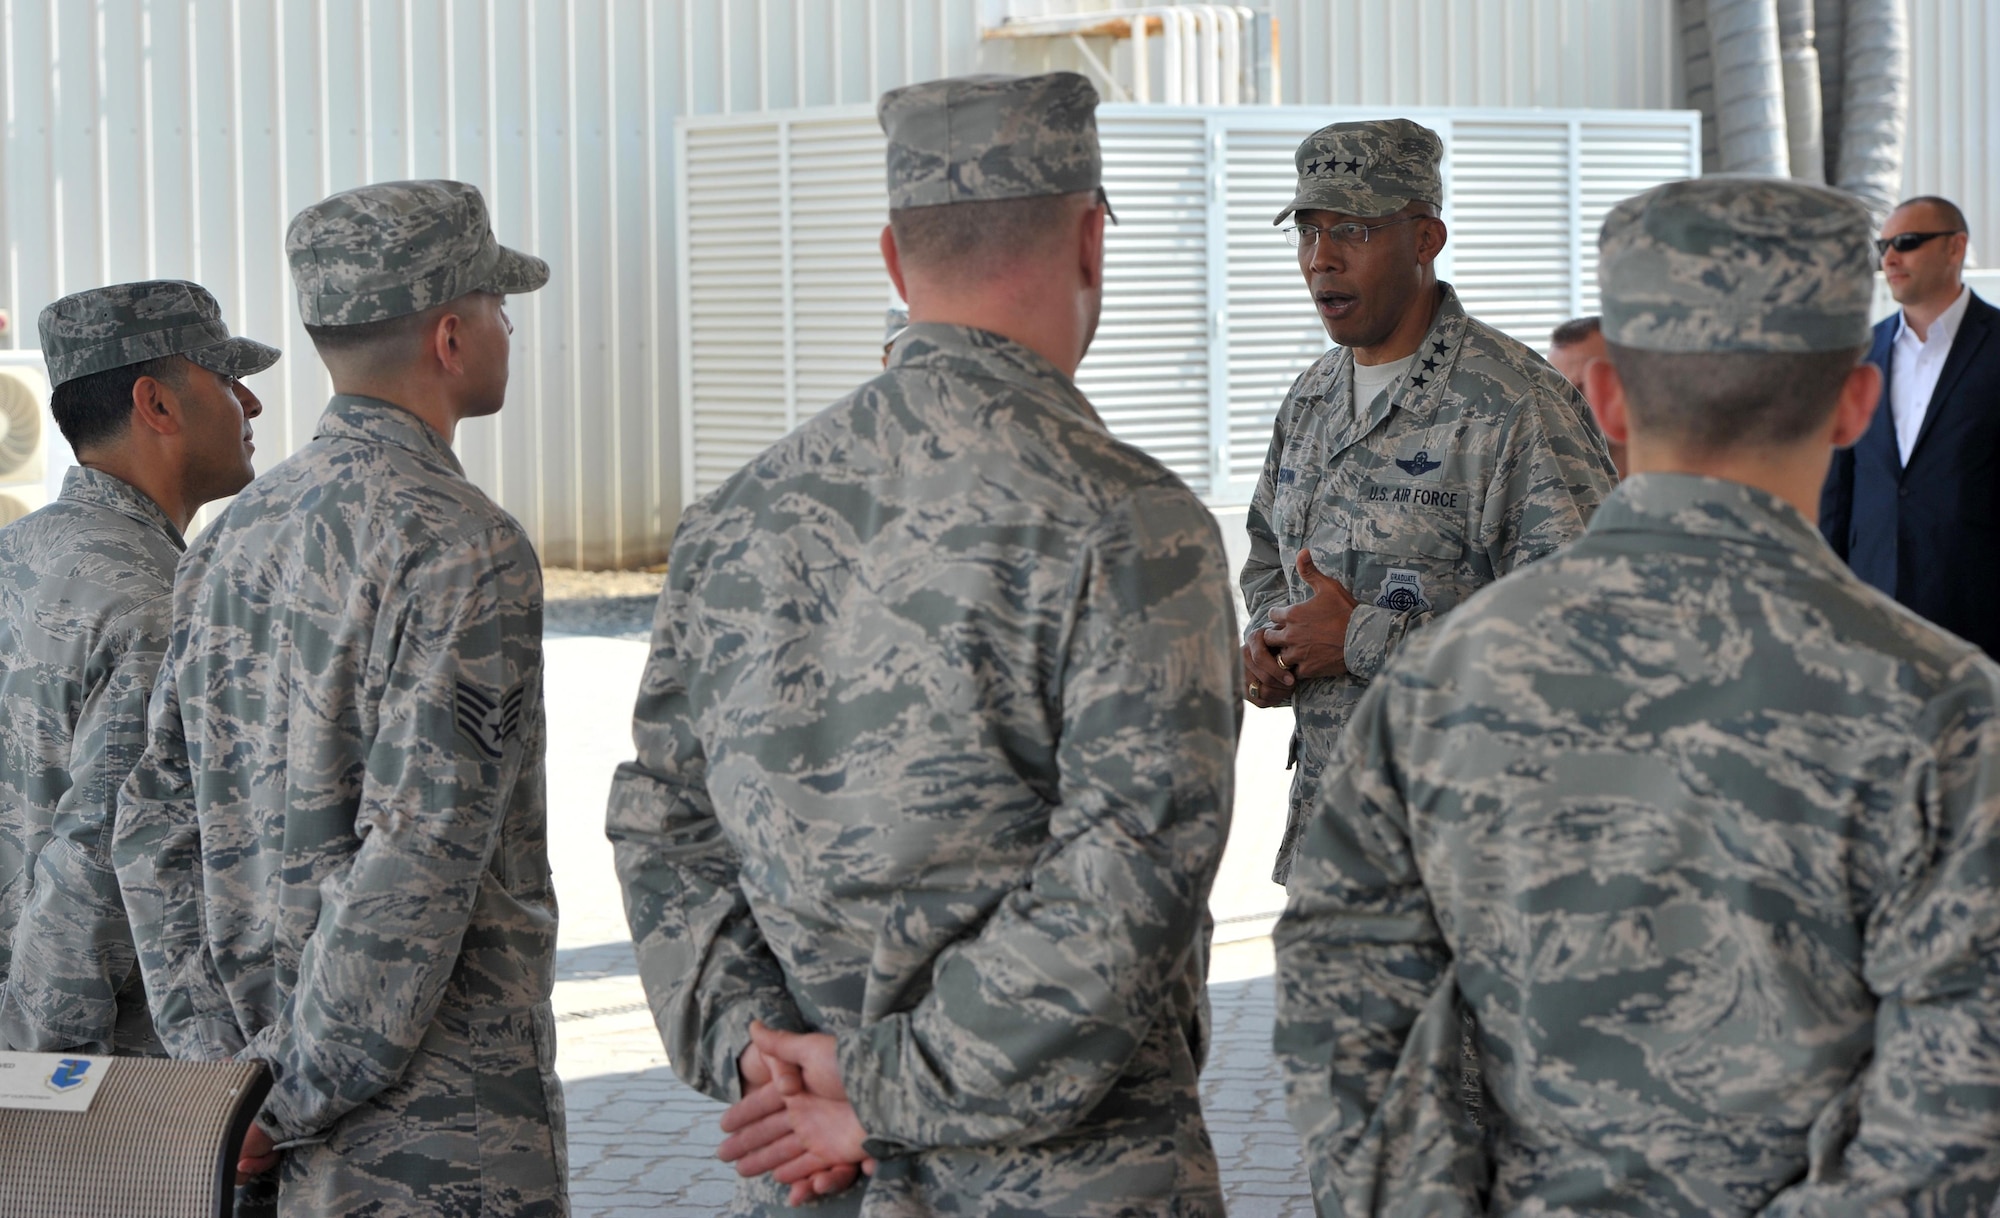 Lt. Gen. Charles Brown Jr., commander of Air Forces Central Command, speaks with 380th Air Expeditionary Wing Airmen at an undisclosed location in Southwest Asia, Feb. 11, 2016. Brown toured several locations around the base before departing later that afternoon. (U.S. Air Force photo by Staff Sgt. Kentavist Brackin/Released)